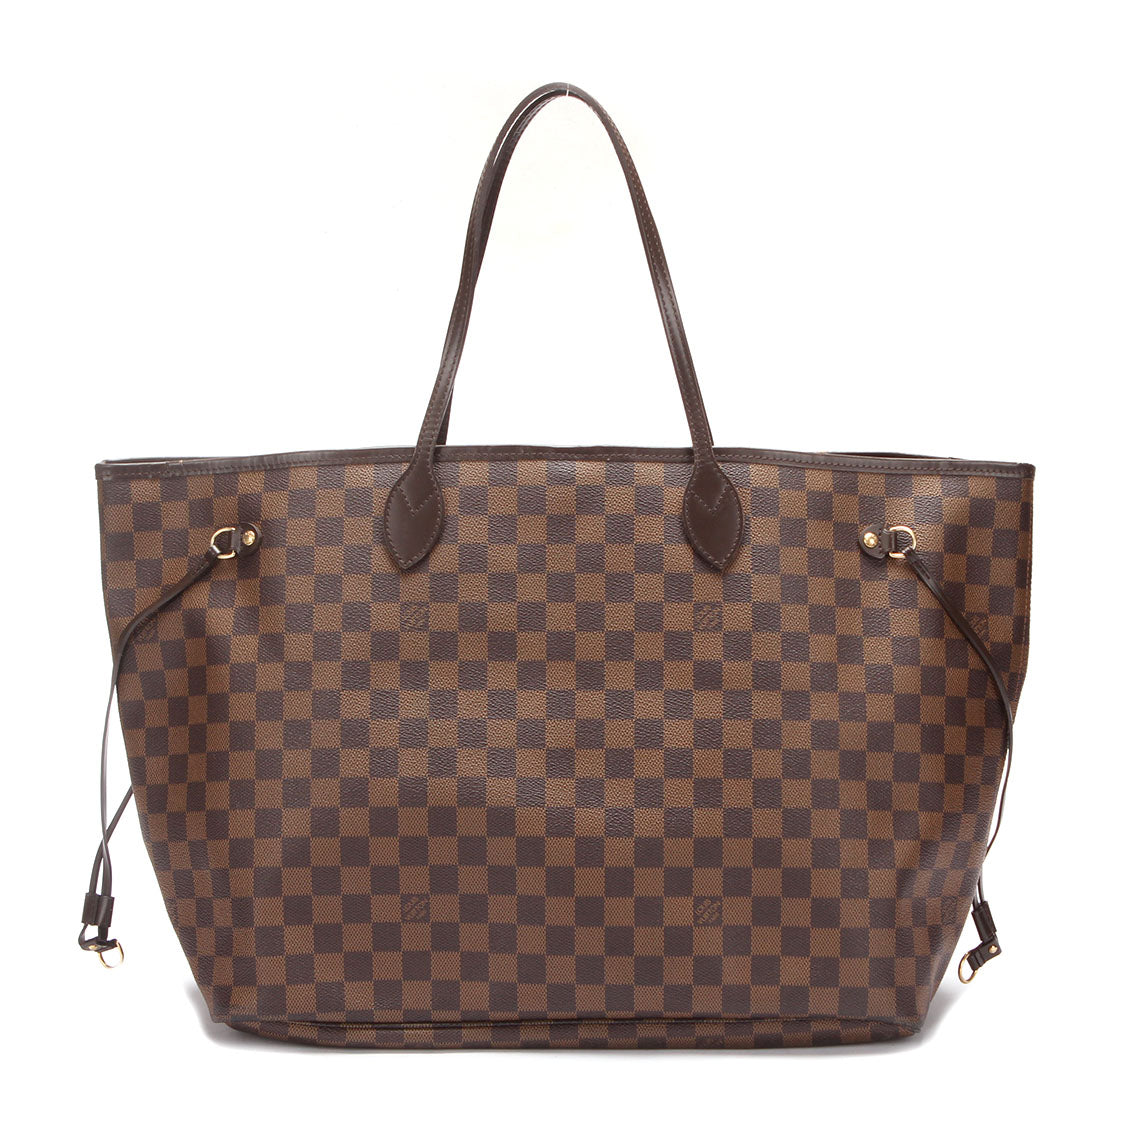 Louis Vuitton Damier Ebene Neverfull GM Canvas Tote Bag in Good condition